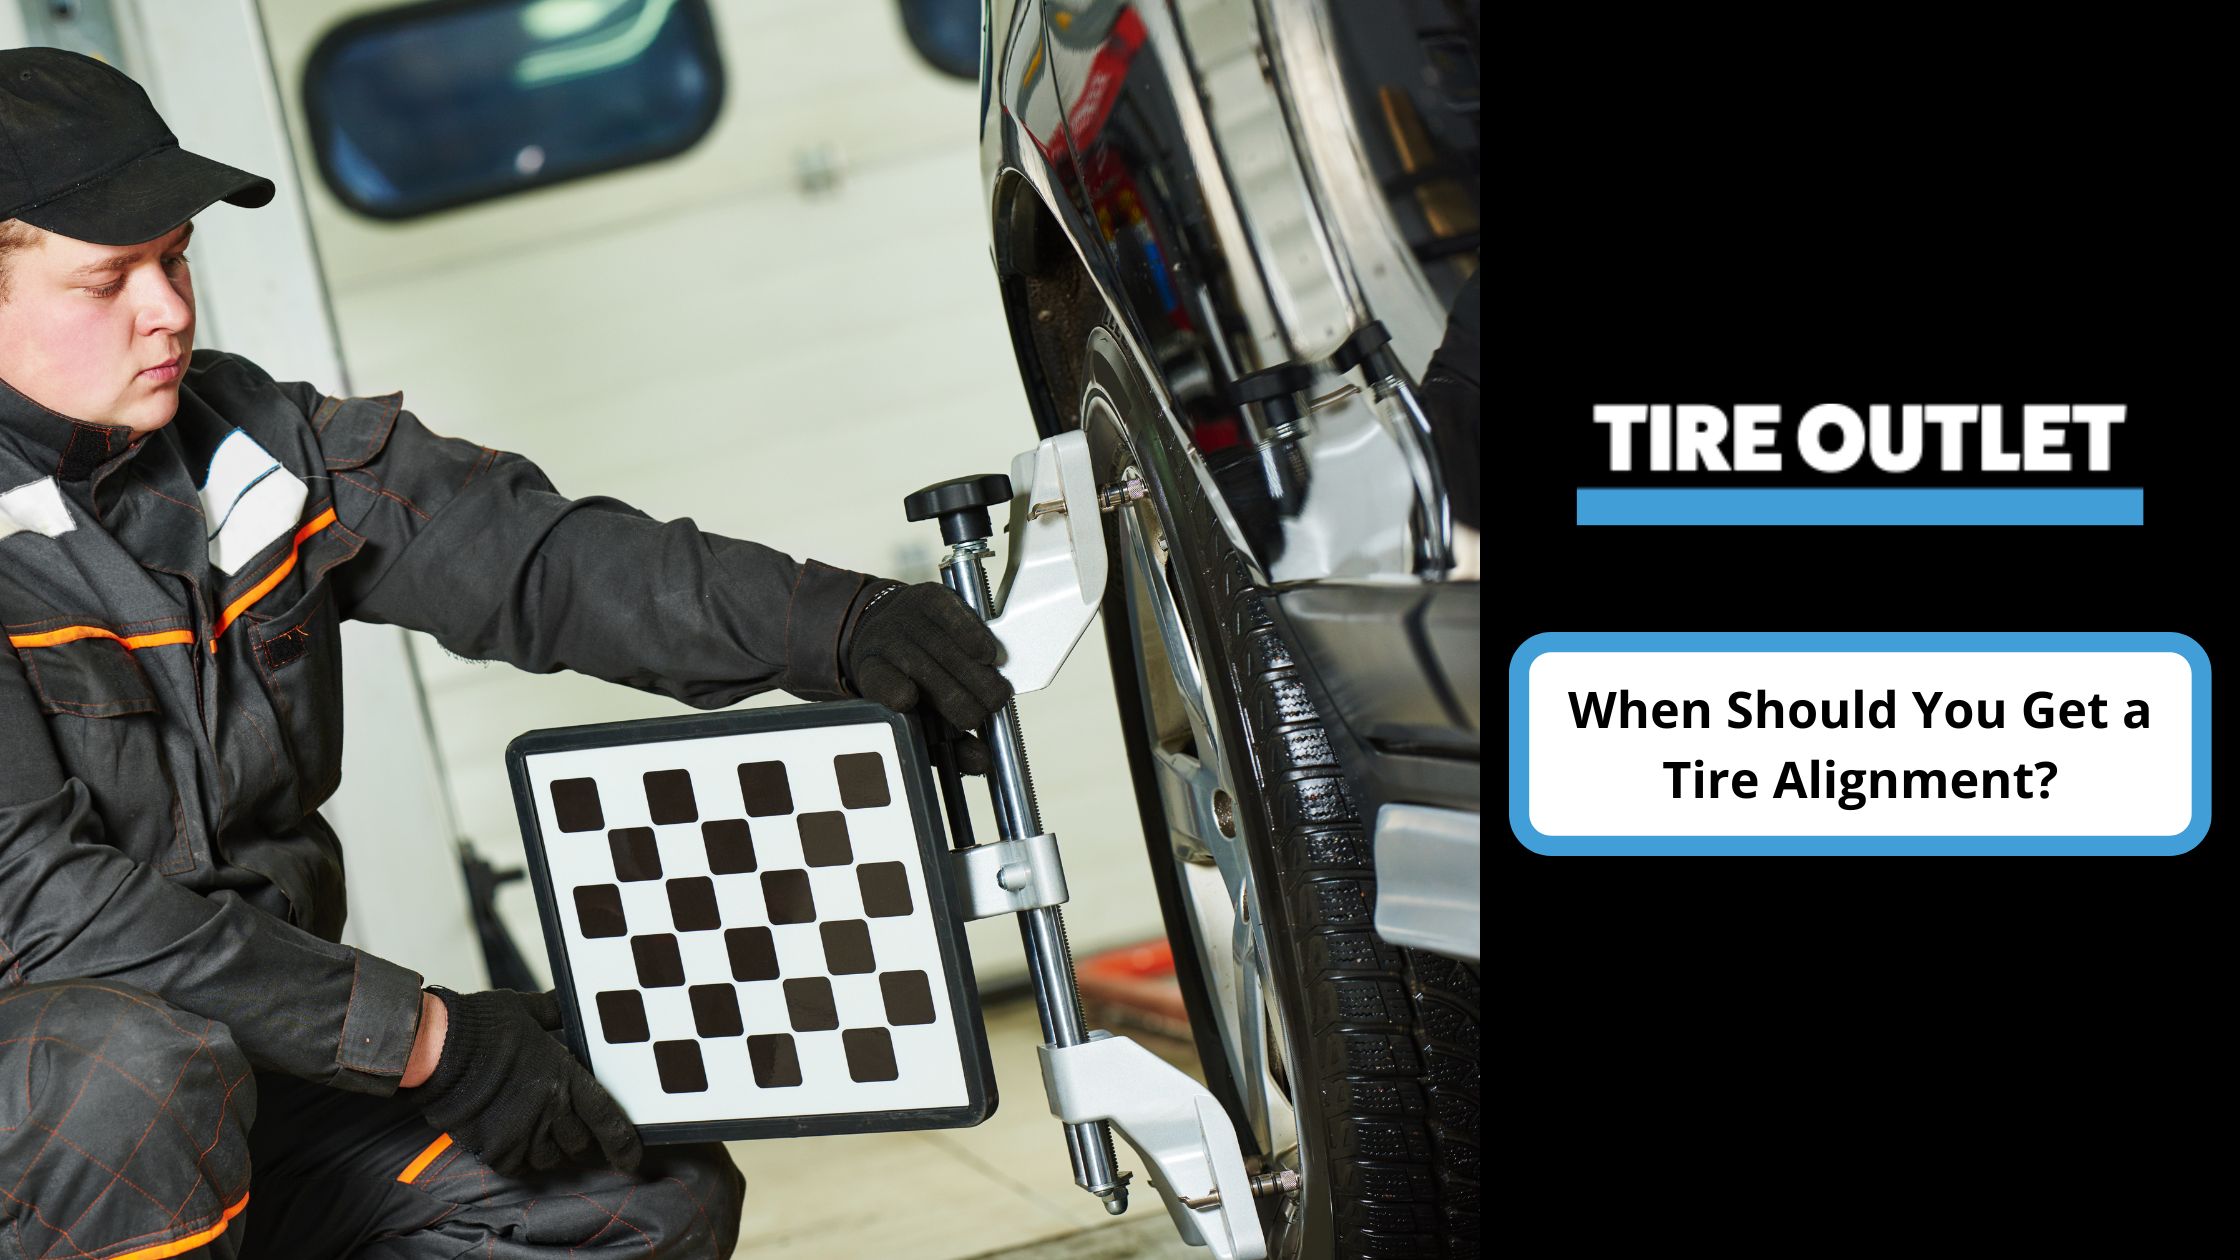 When Should You Get a Tire Alignment? - AtoAllinks